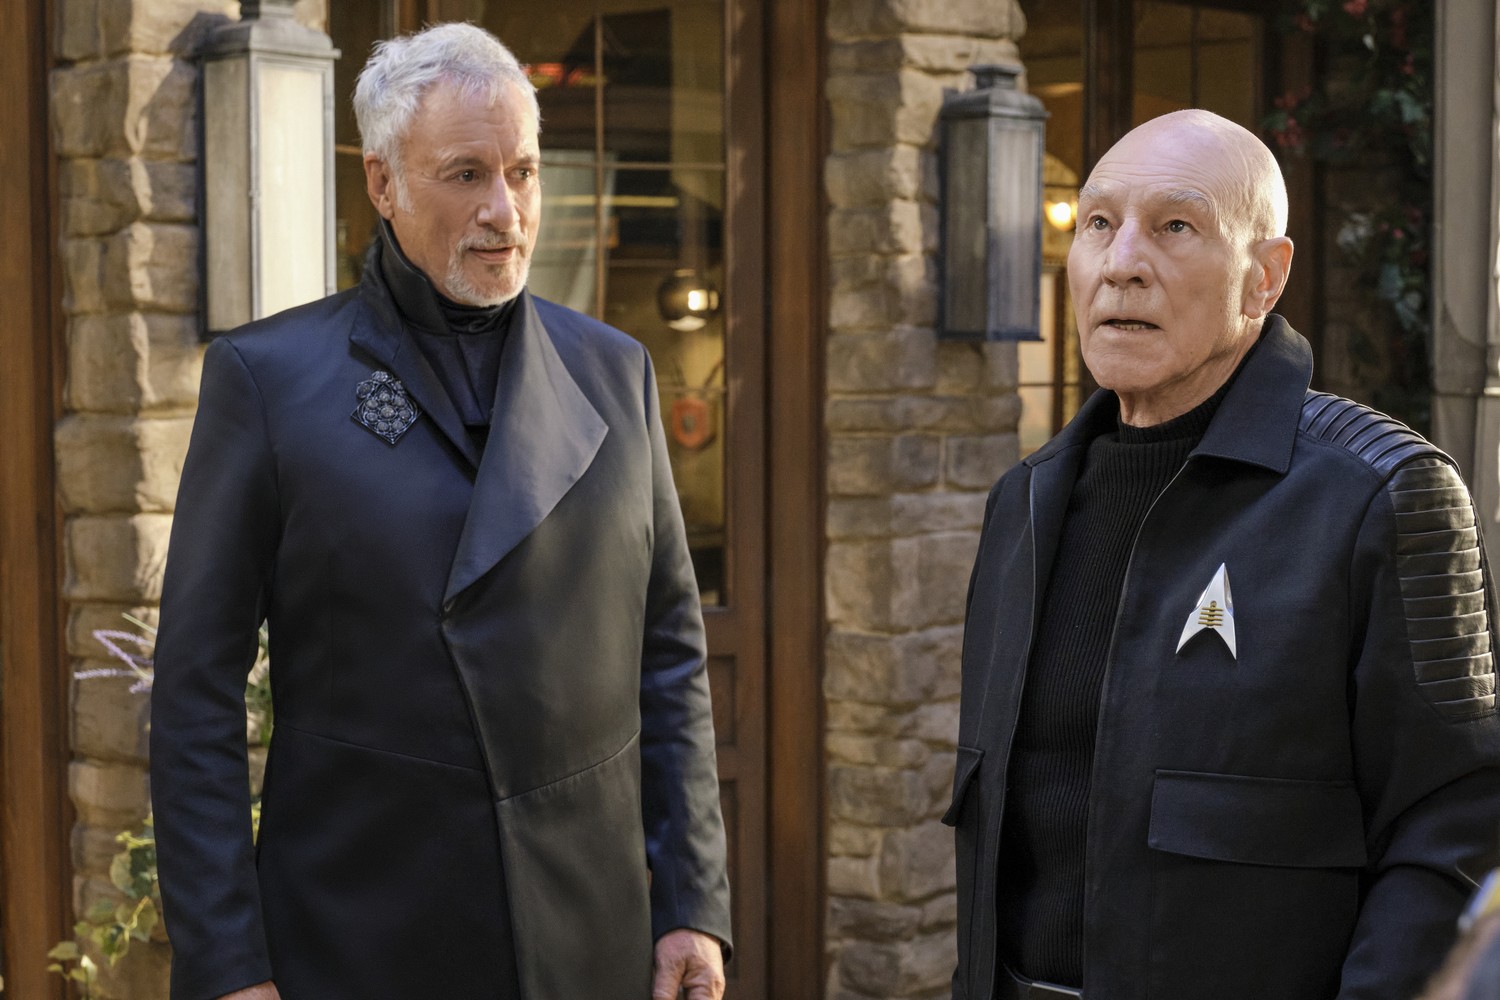 Star Trek: Picard S2 Episode 4 Review: 'Watcher' Slows Down at Its Peril